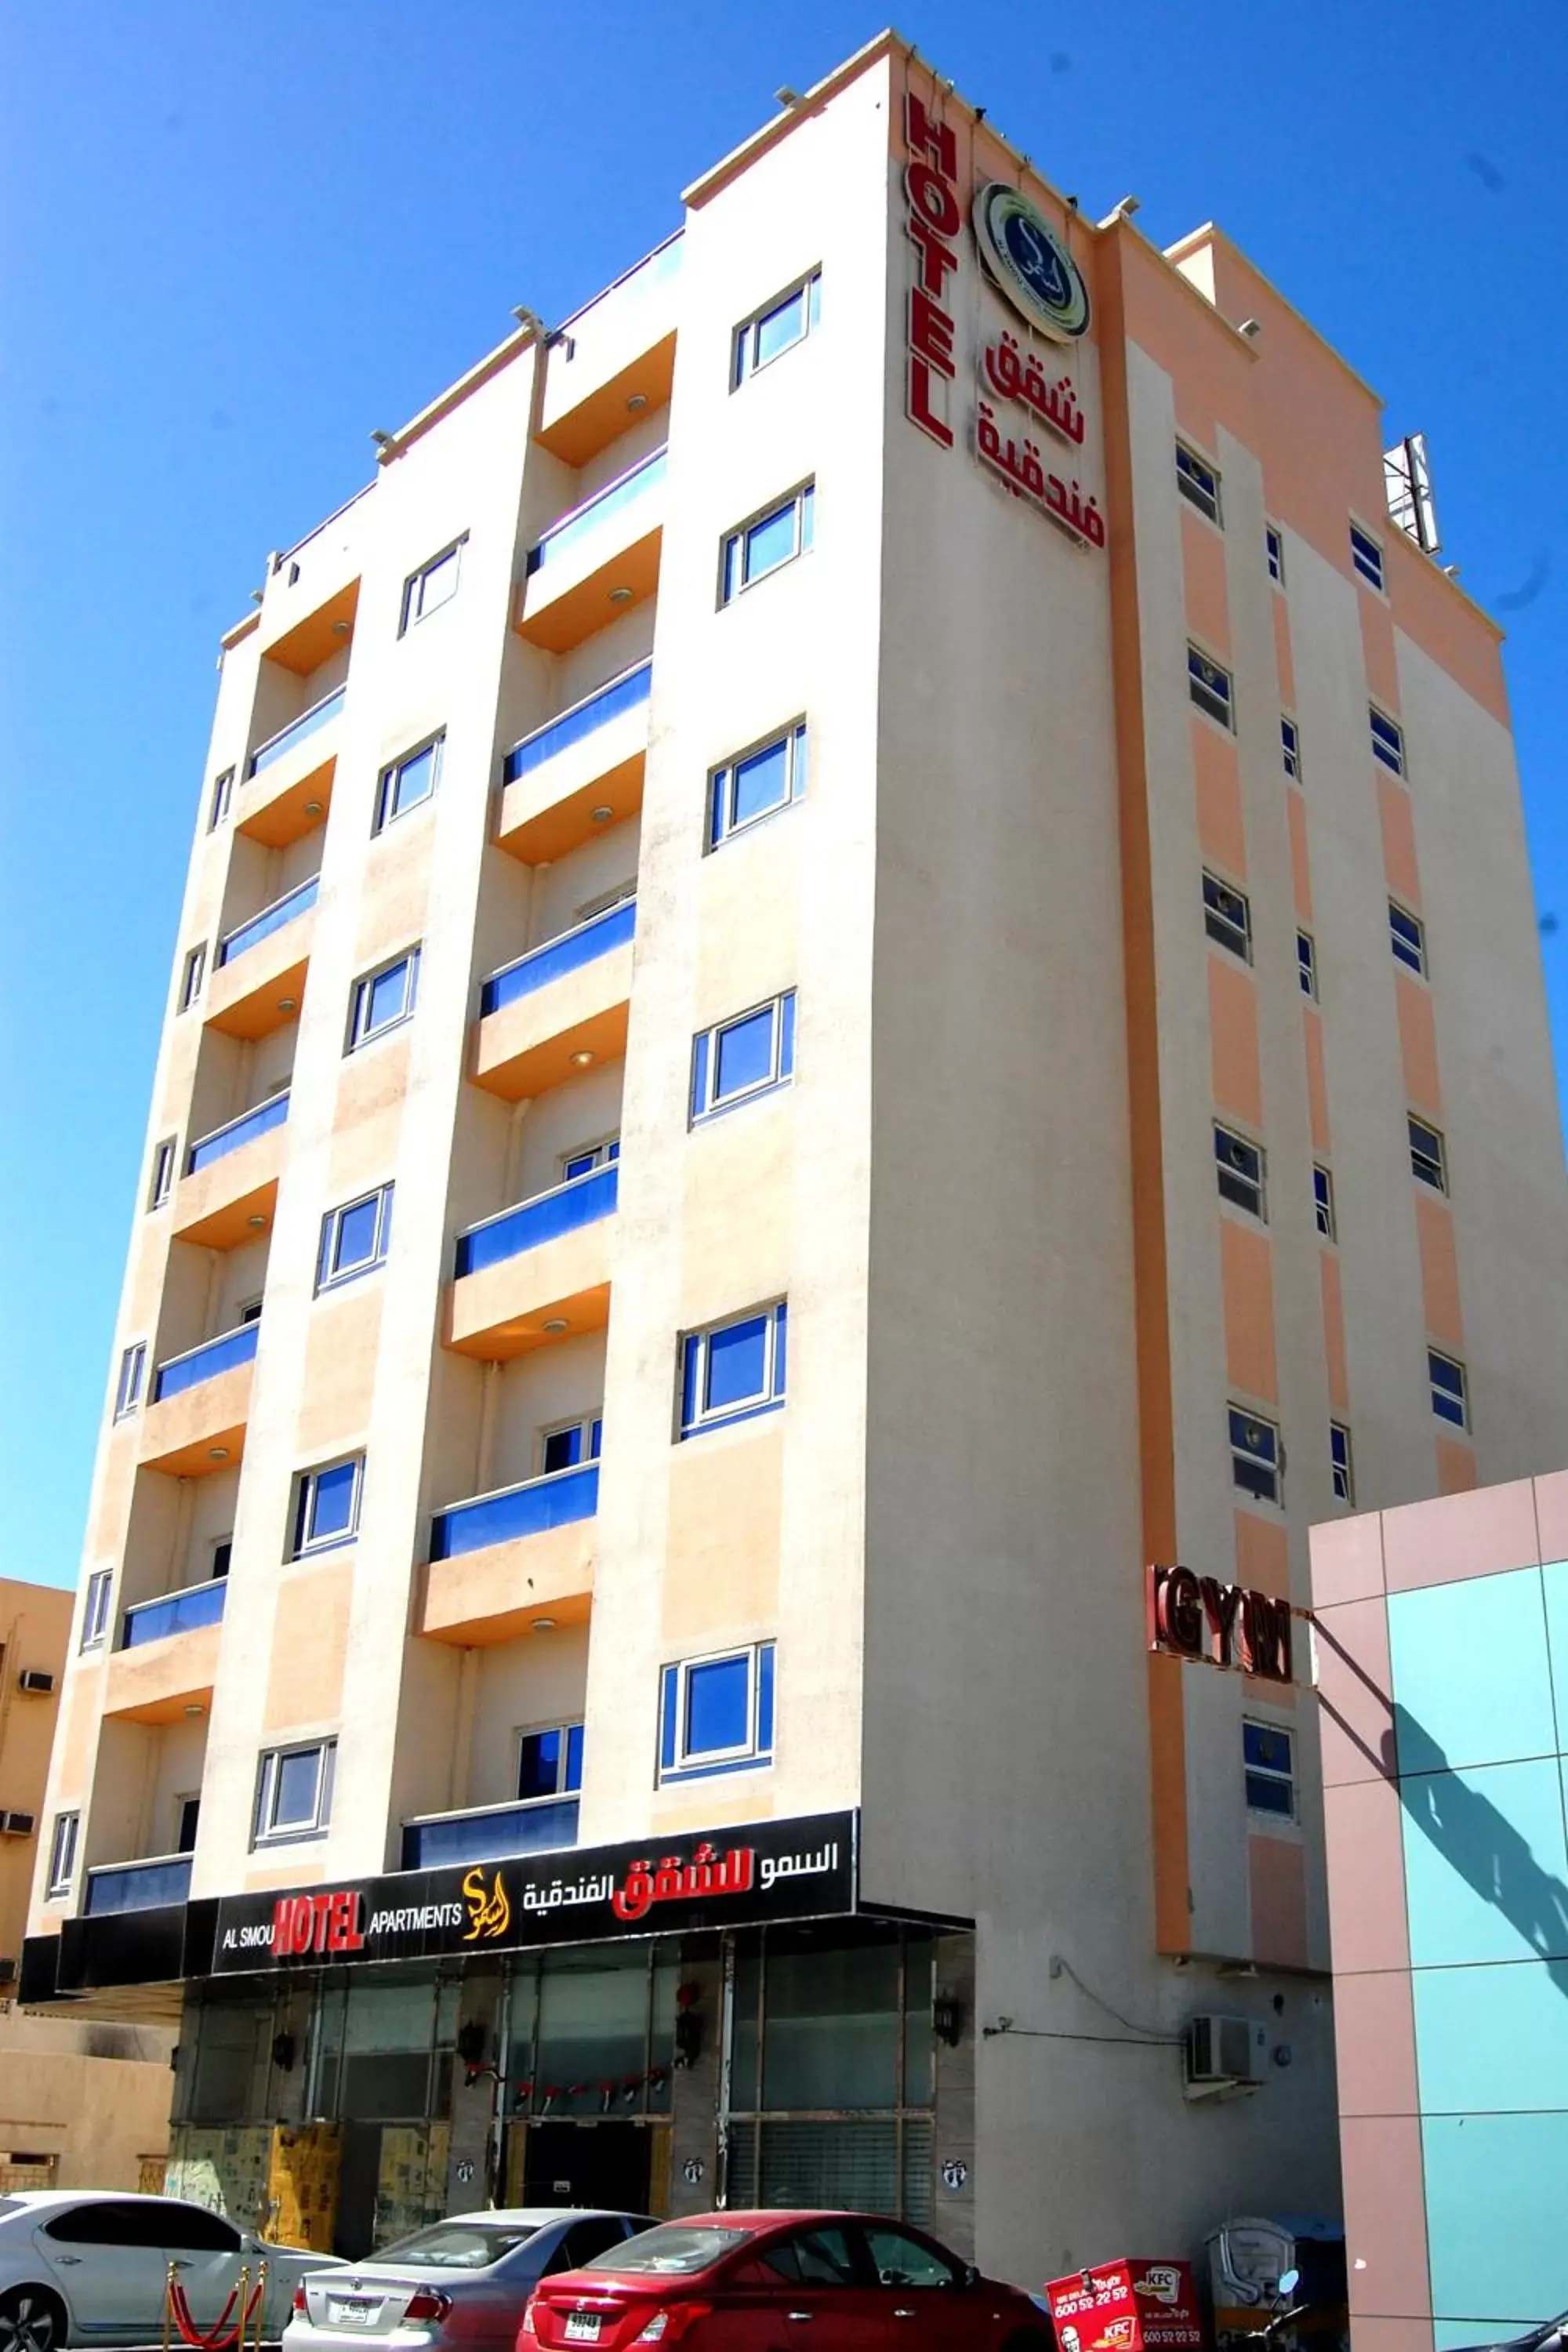 Property Building in Al Smou Hotel Apartments - MAHA HOSPITALITY GROUP